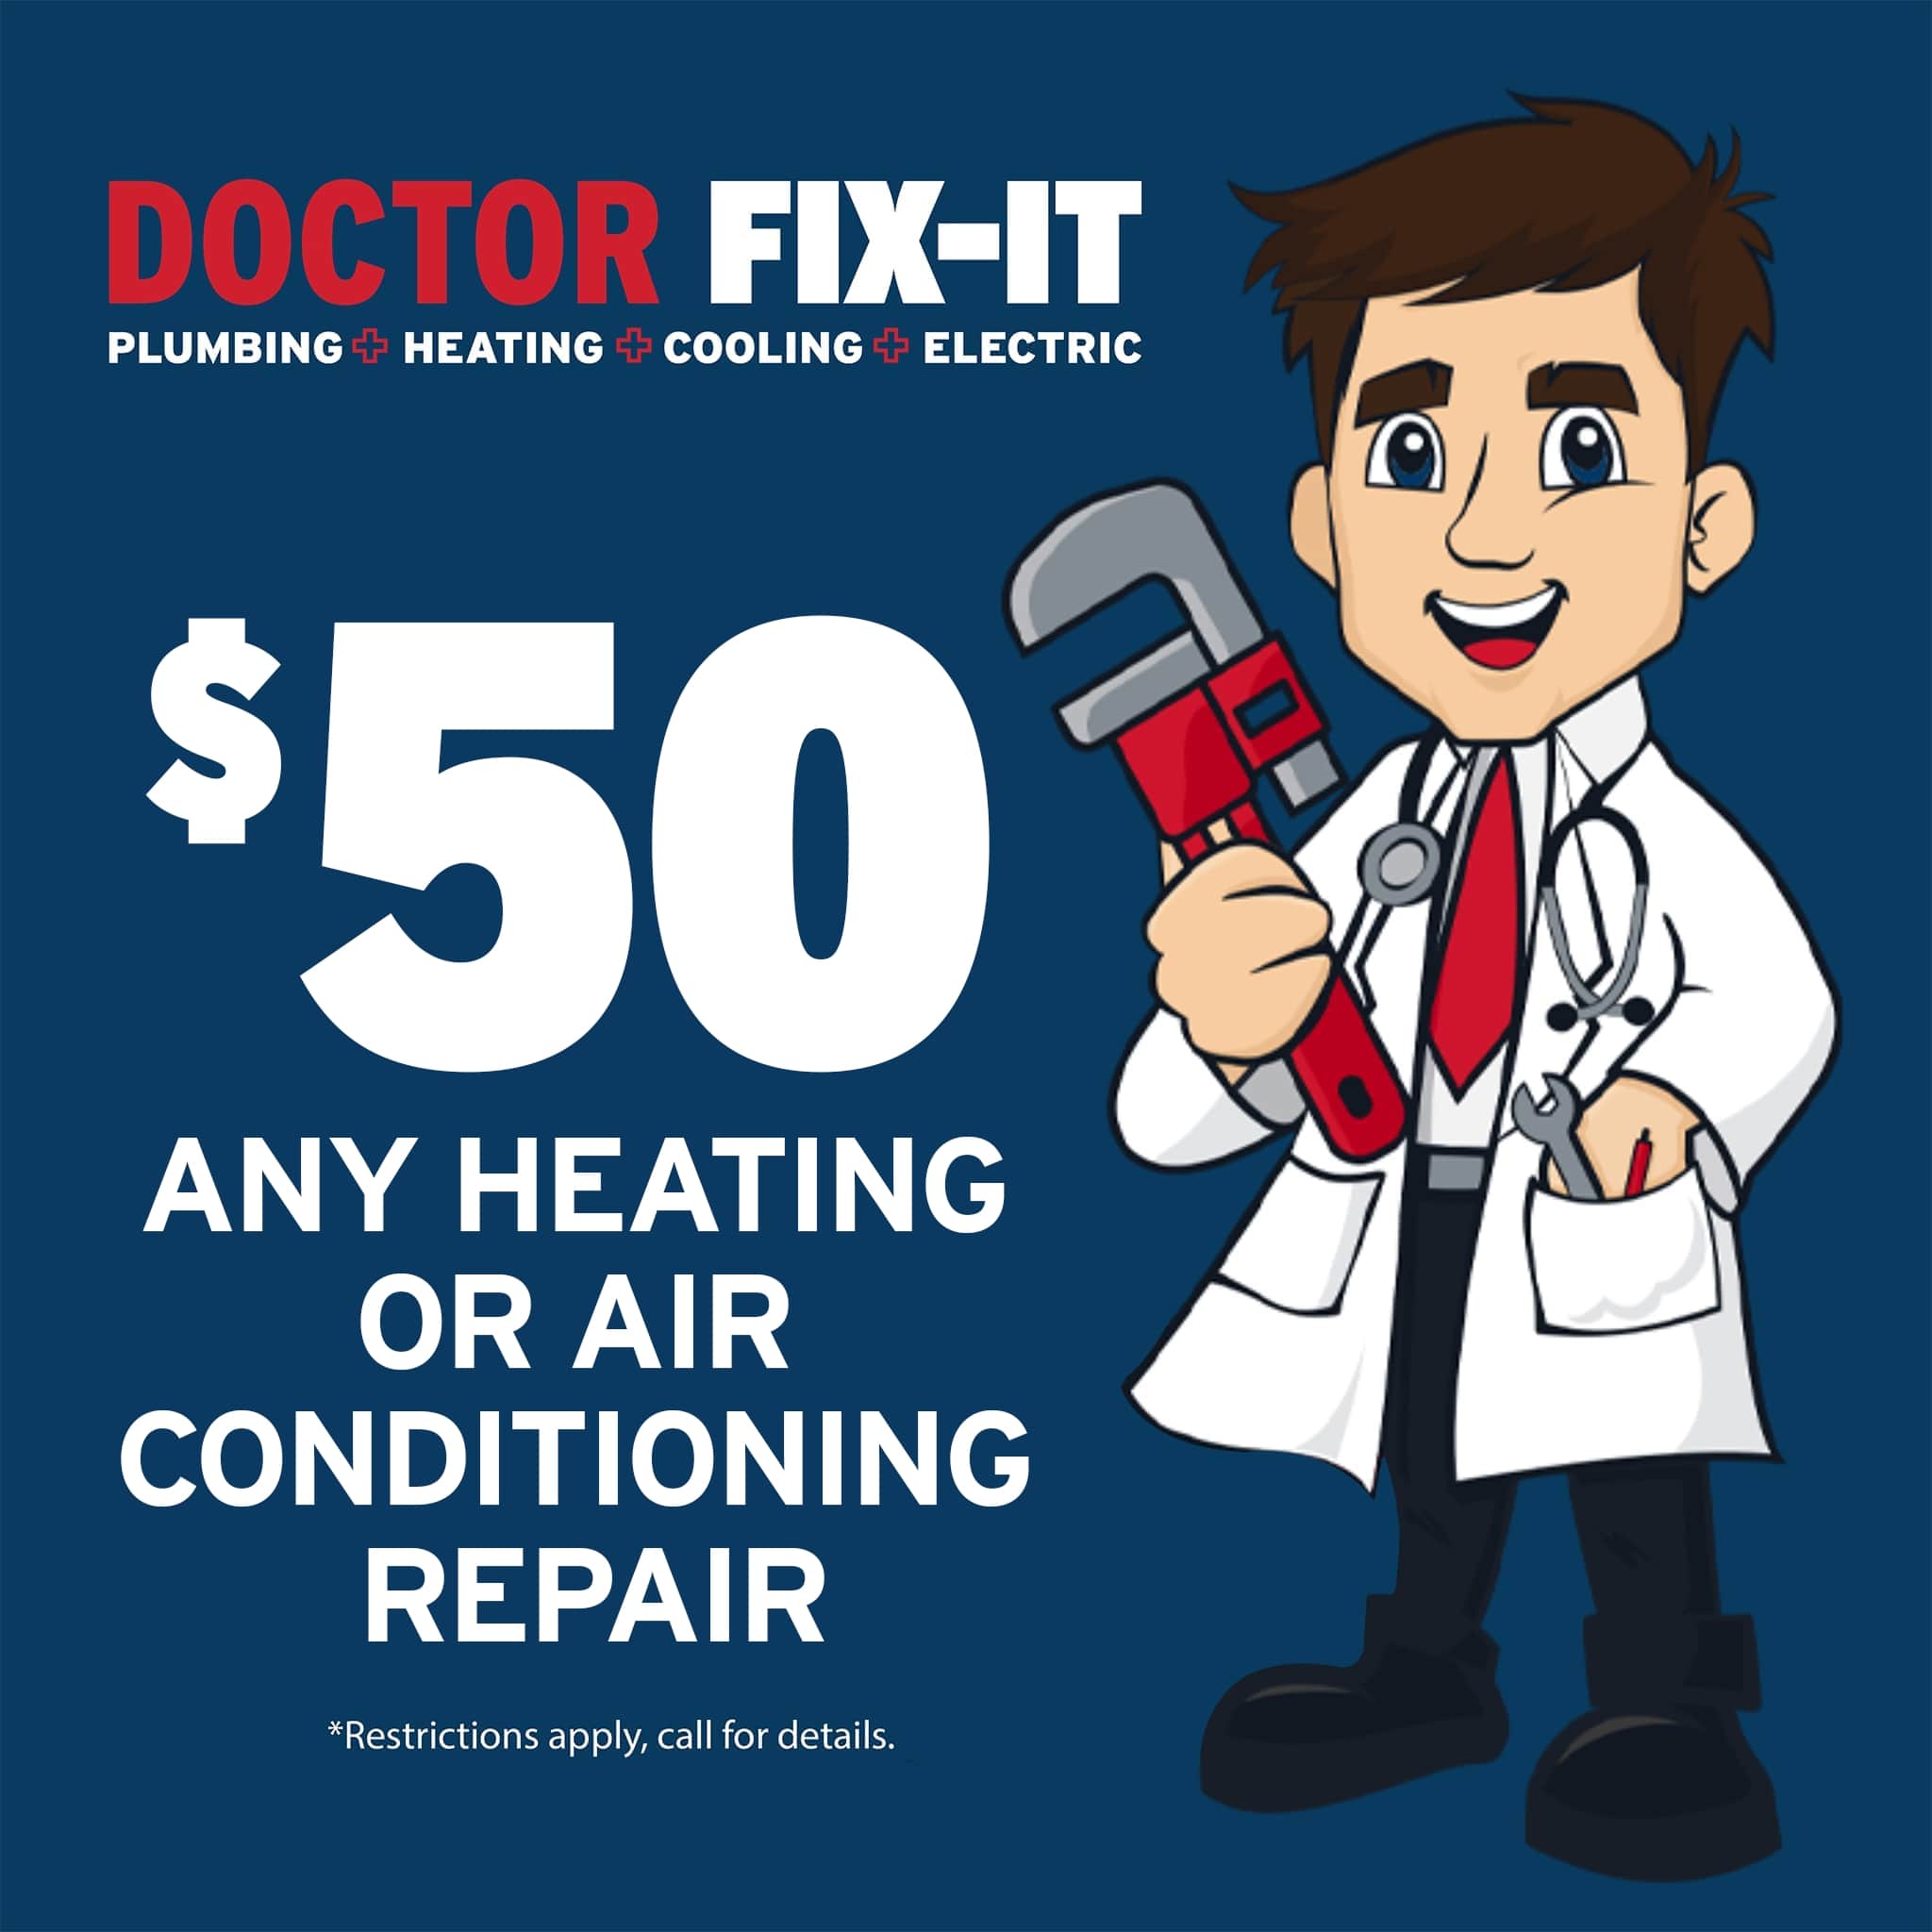 heating or air conditioning repair v1